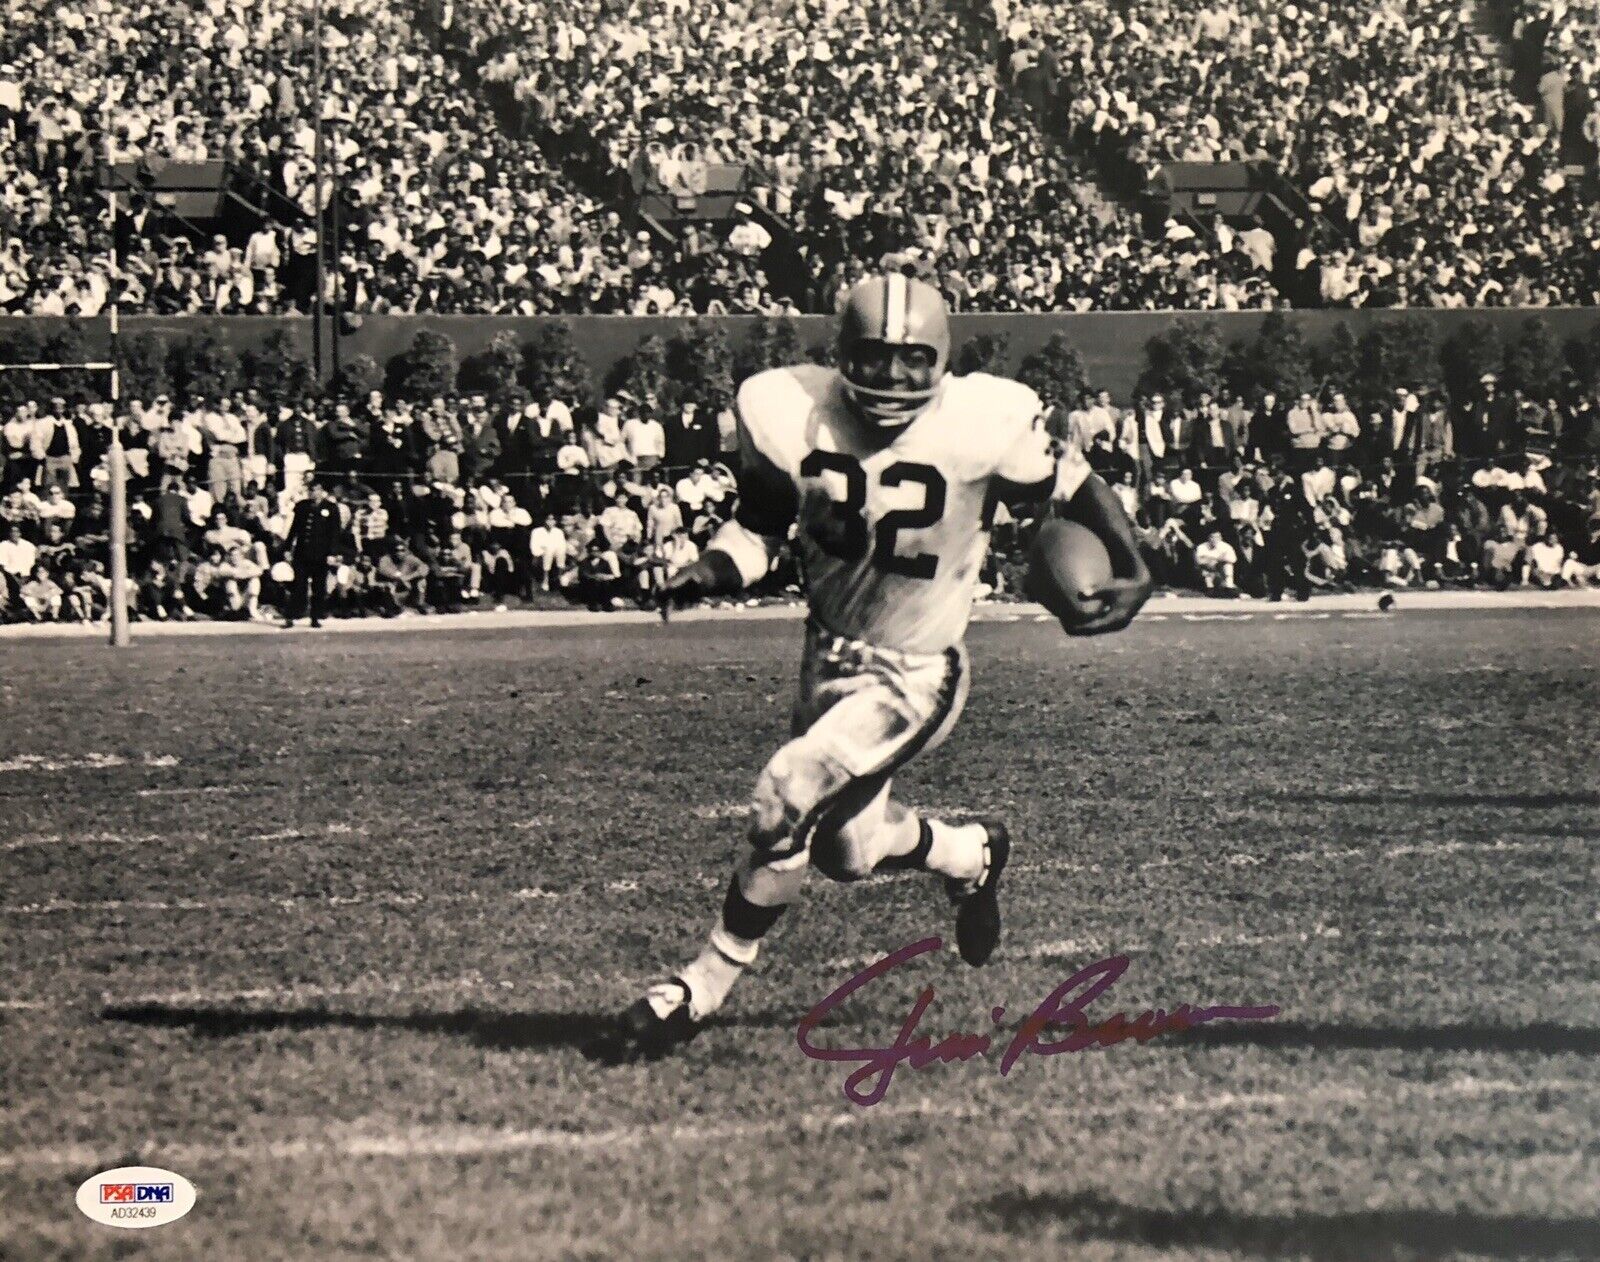 Jim Brown Signed Autographed 11x14 Photo Poster painting Cleveland Browns Goat HOF Psa/Dna